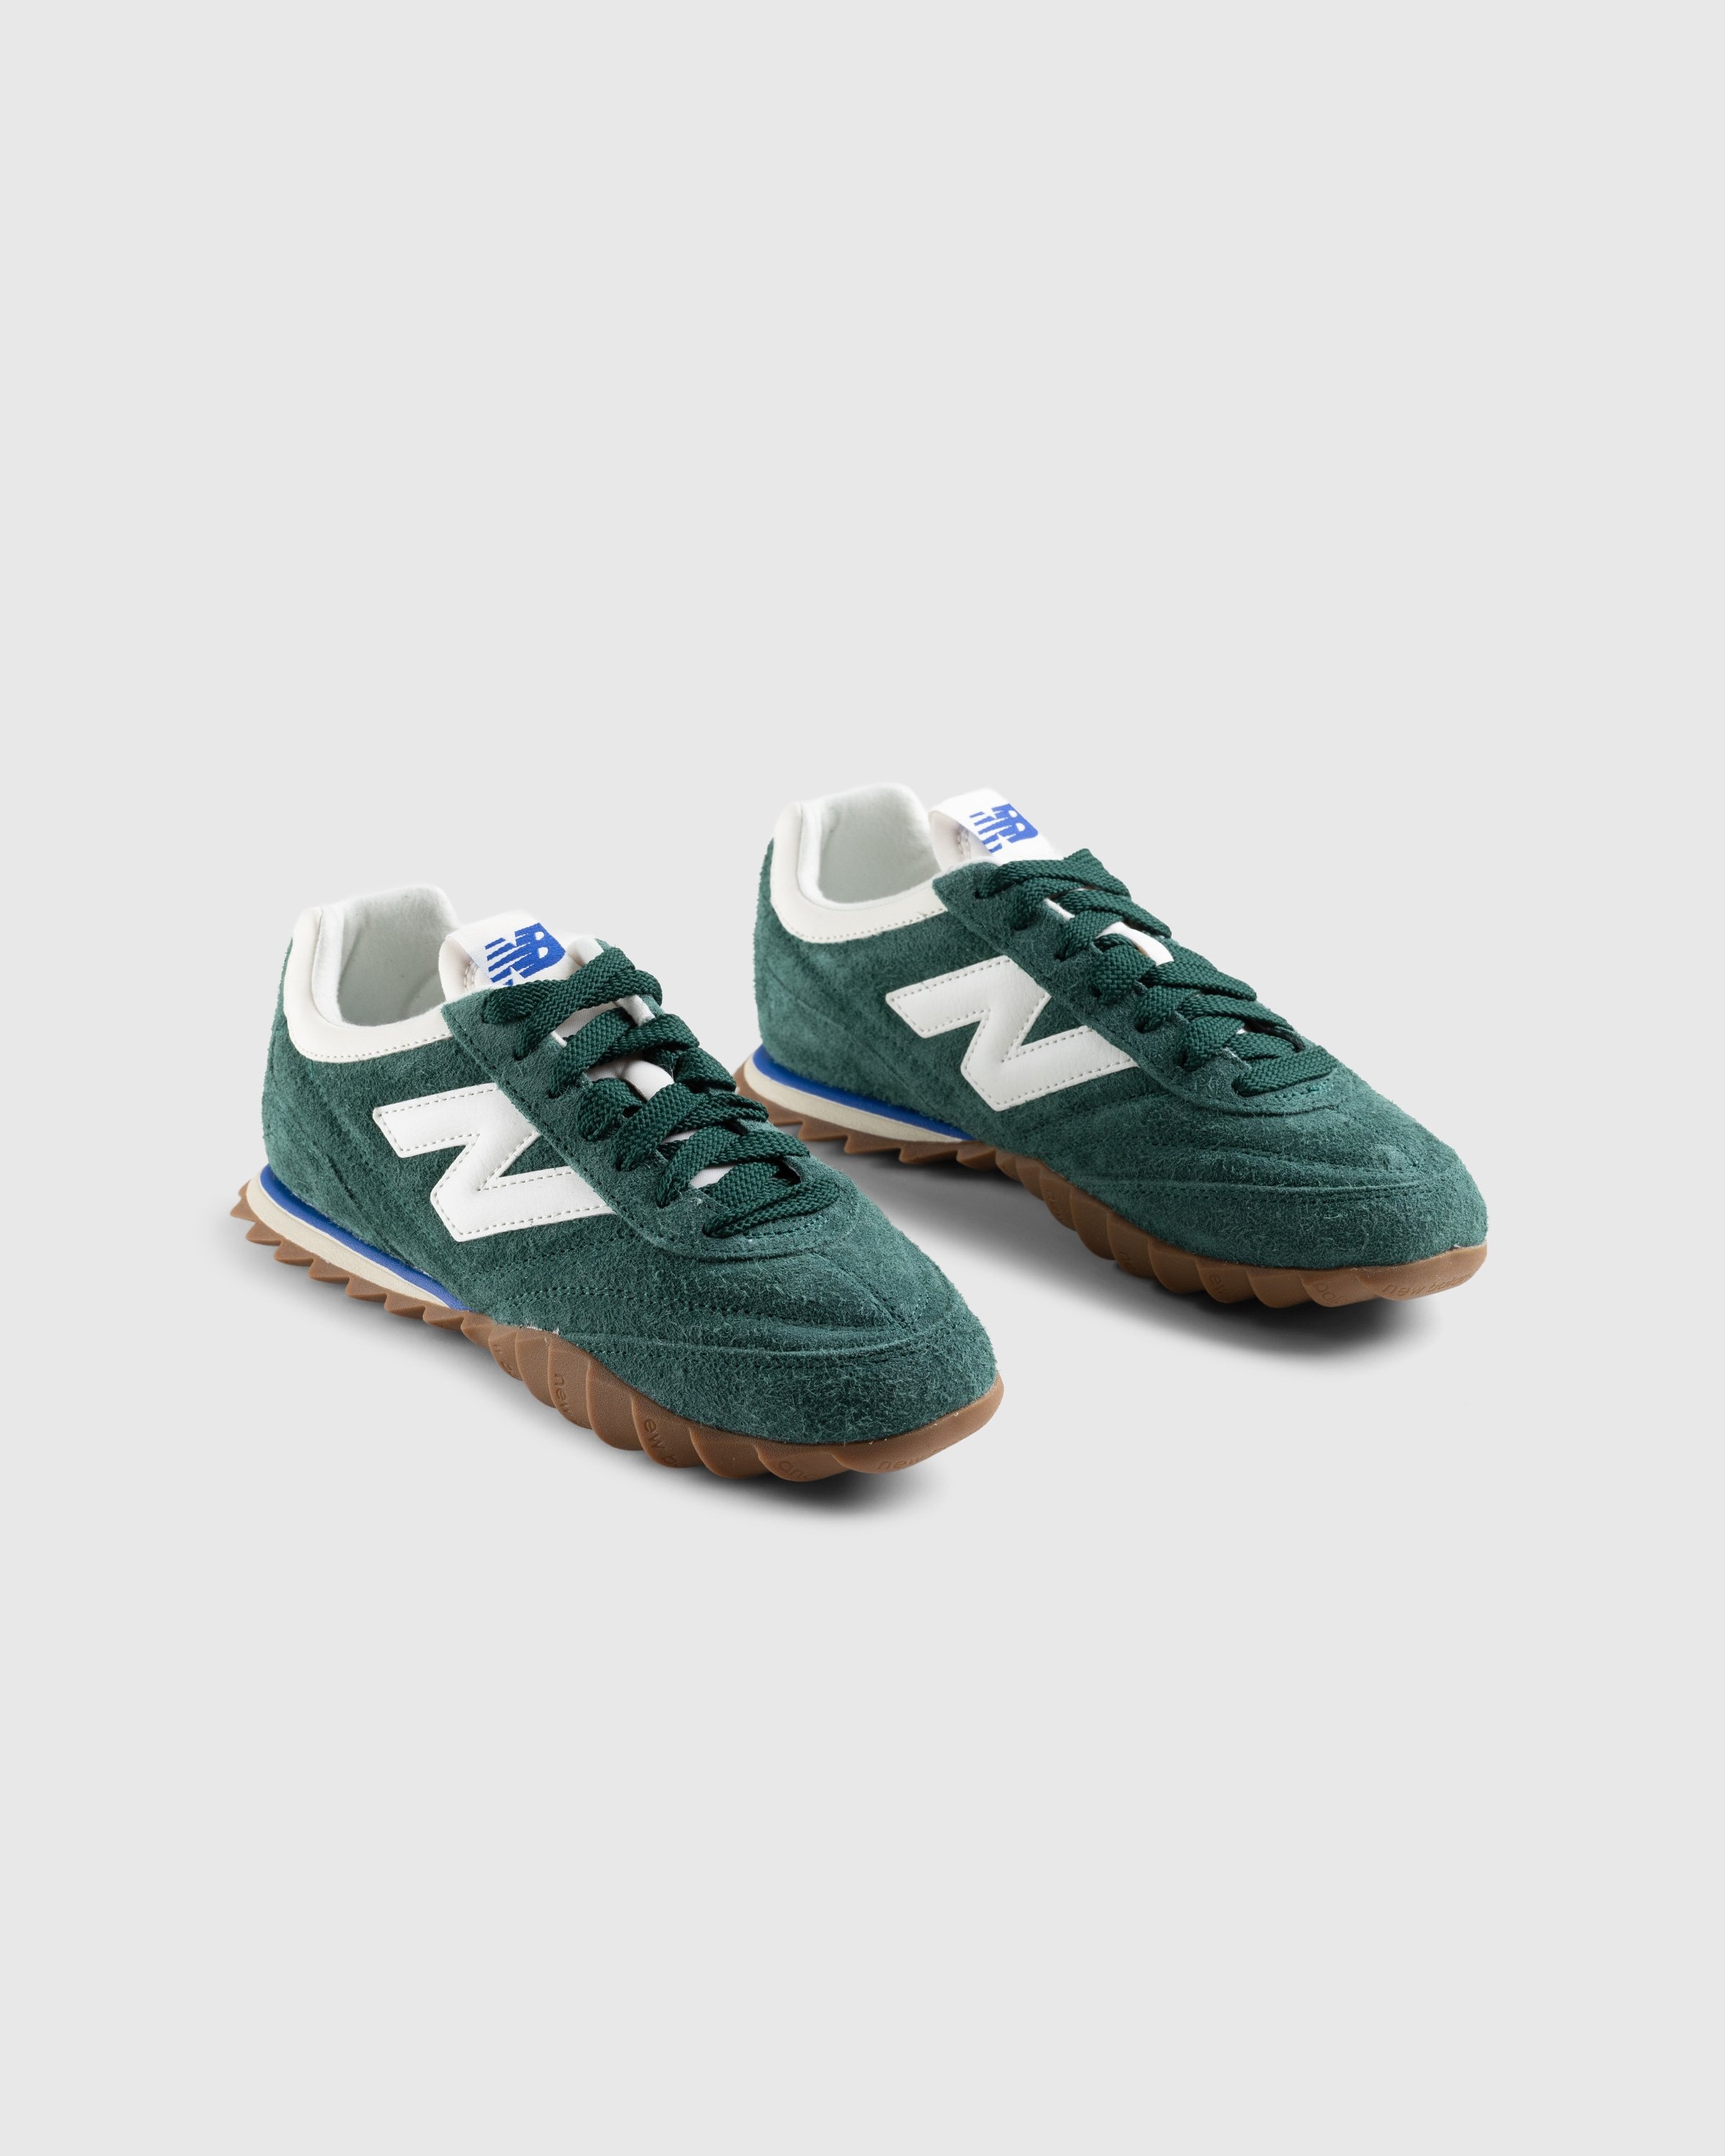 New Balance – URC30RC Nightwatch Green - Low Top Sneakers - Green - Image 3